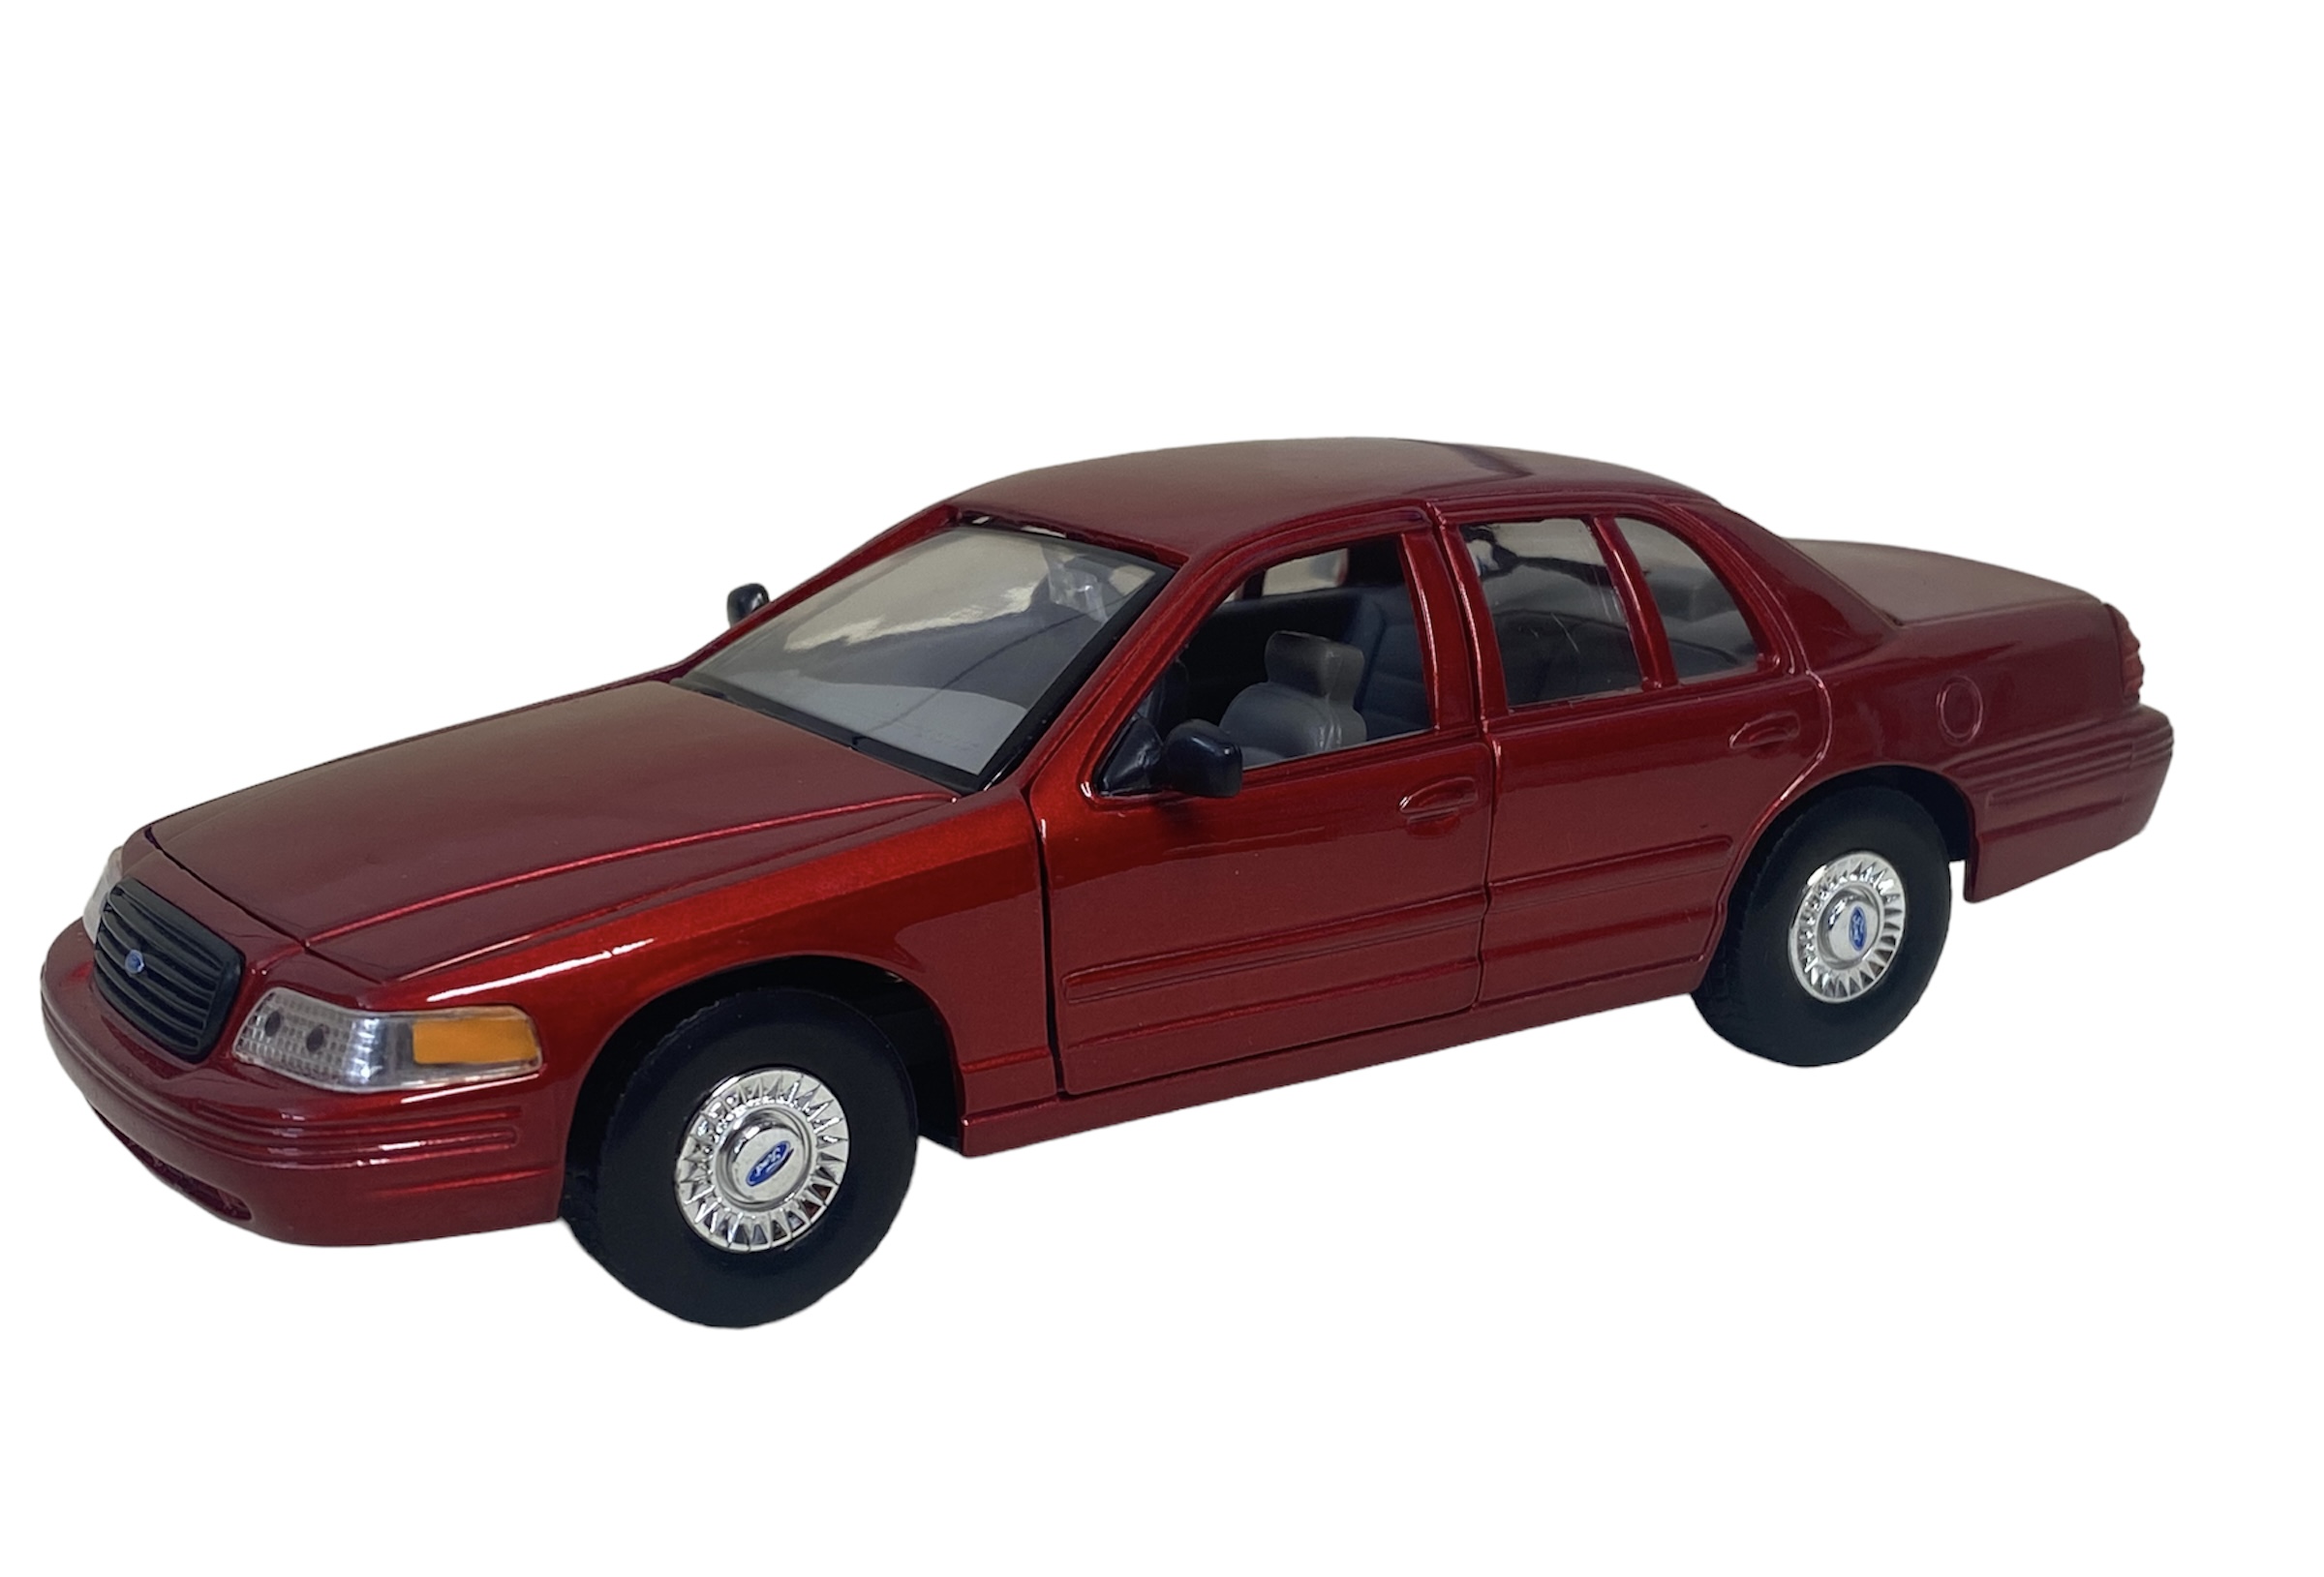 1999 FORD CROWN VICTORIA - 1:27 SCALE BY WELLY - NO BOX - RED